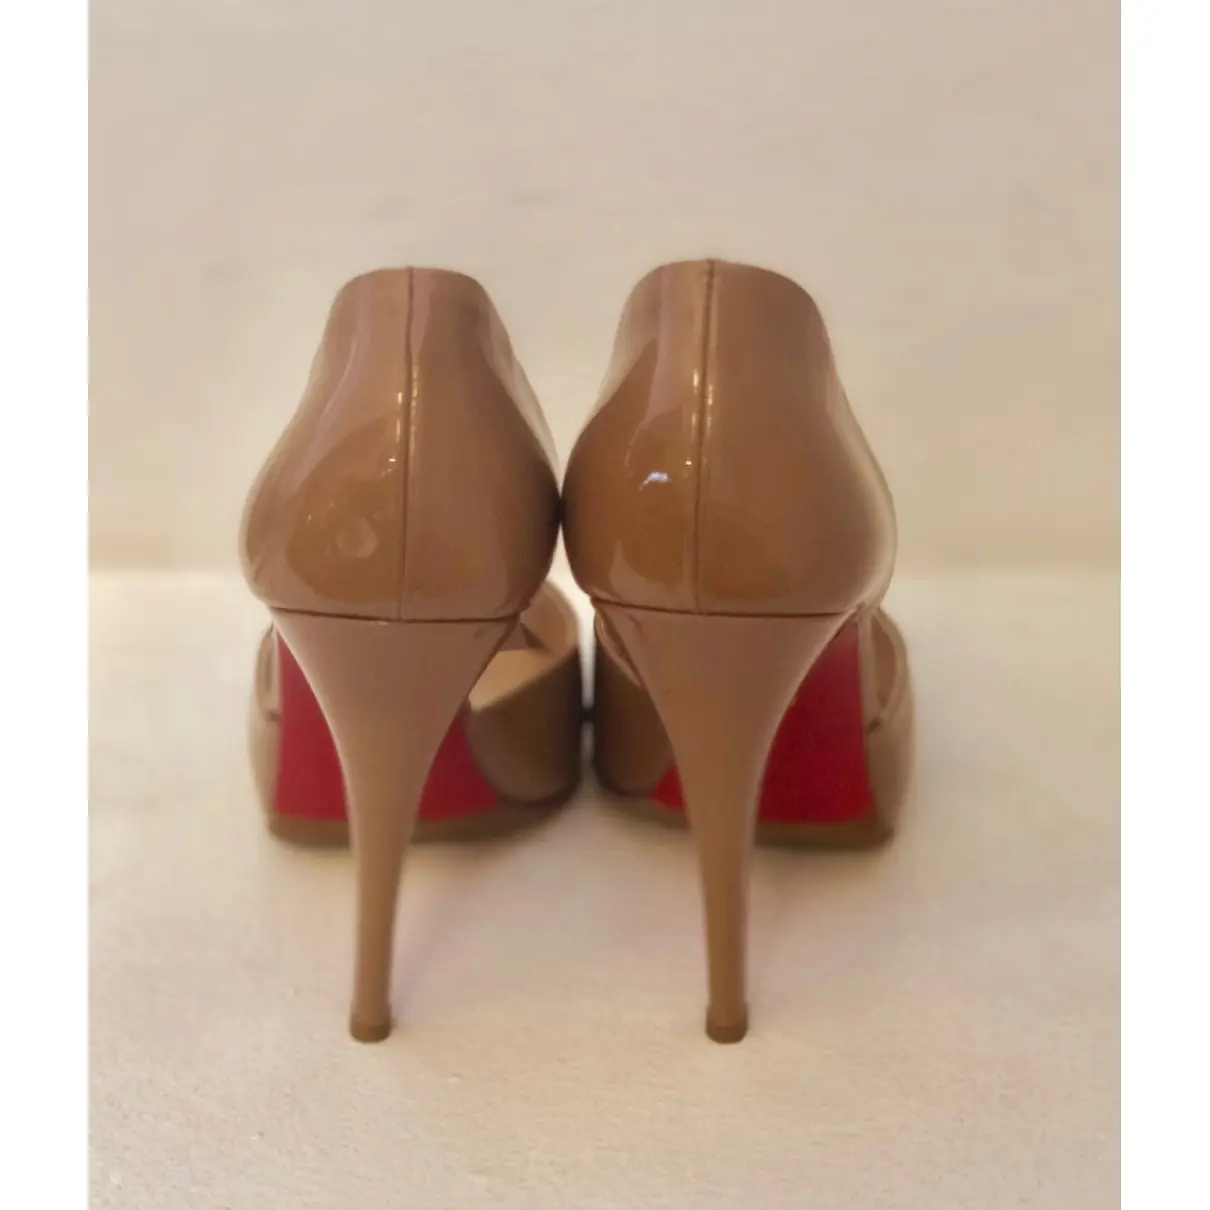 Buy Christian Louboutin Very Privé leather heels online